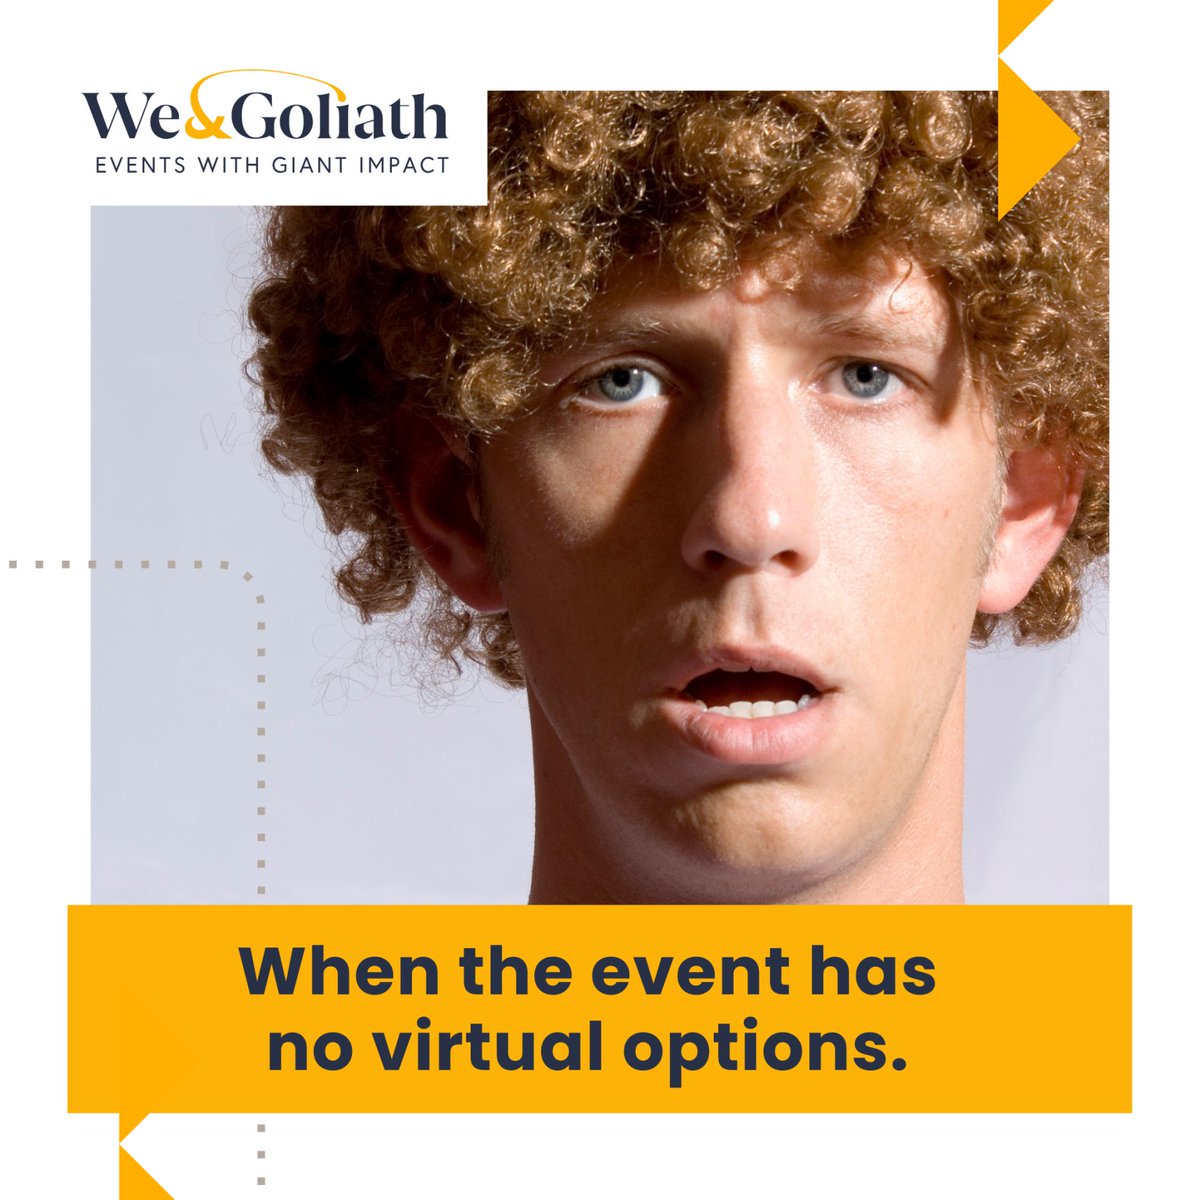 Virtual events shatter attendance limits! Global reach, no venue constraints. Engage audiences at an unprecedented scale. Book your FREE Session today: visit.weandgoliath.com/freesession
#EventIndustry #HybridEvents #EventMarketing